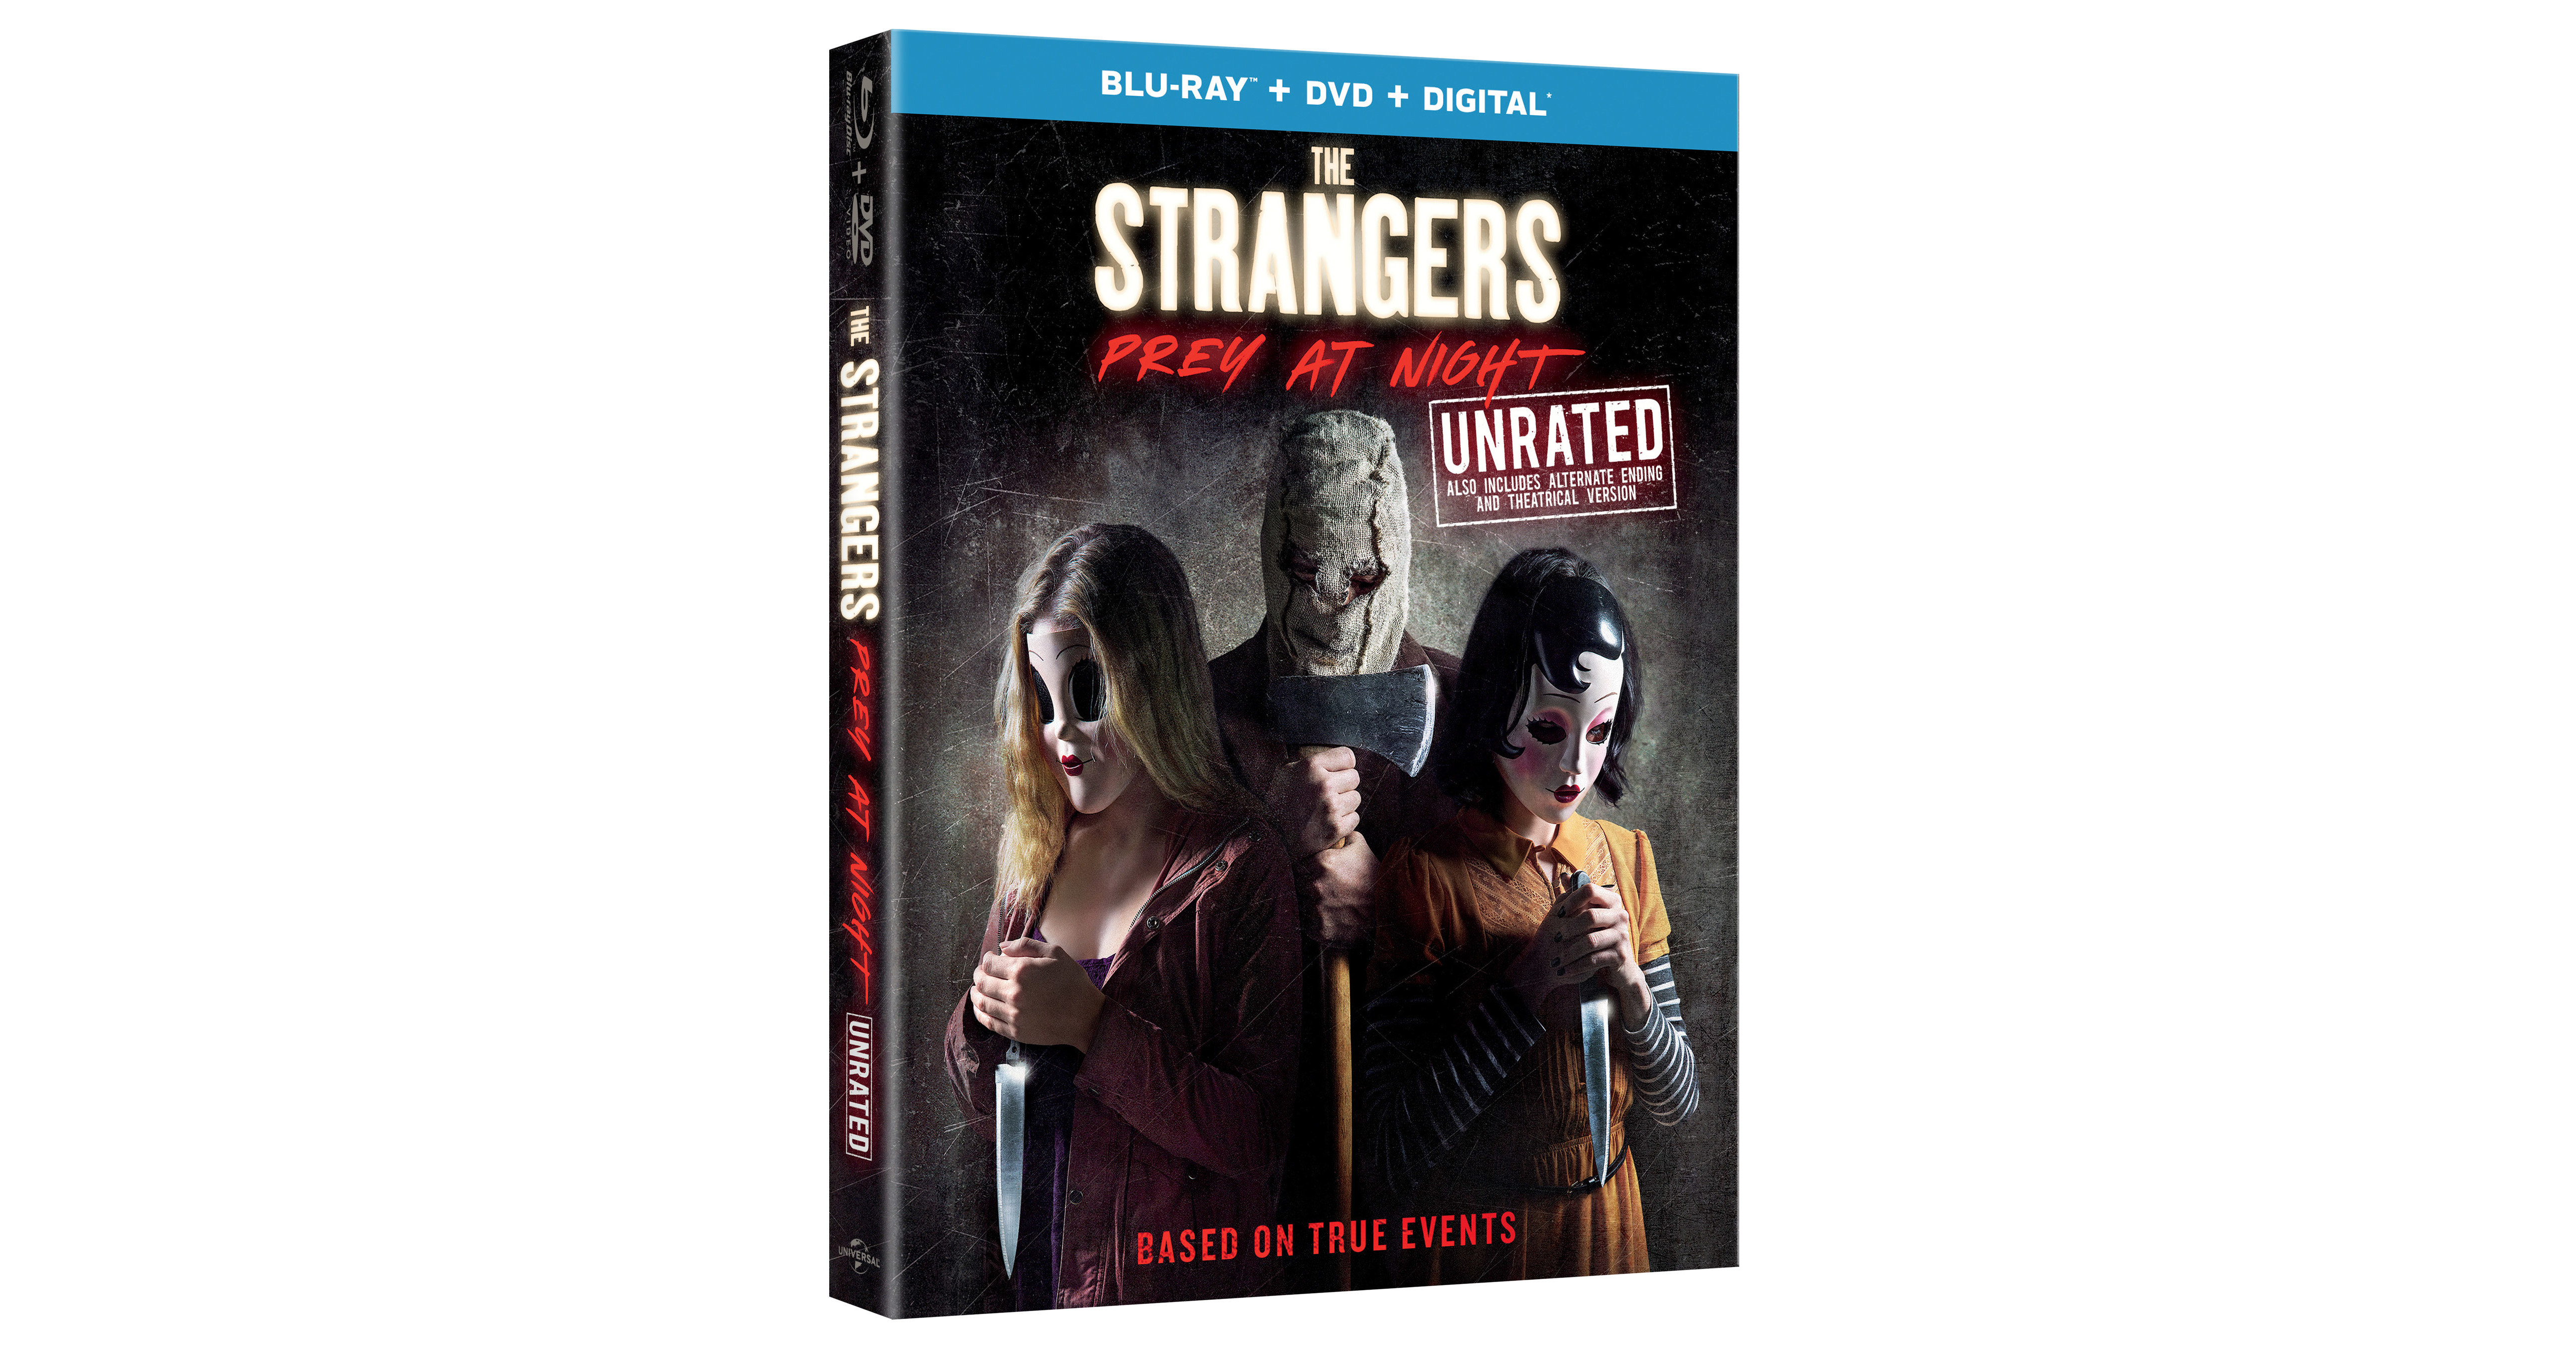 Is The Strangers: Prey at Night a True Story?